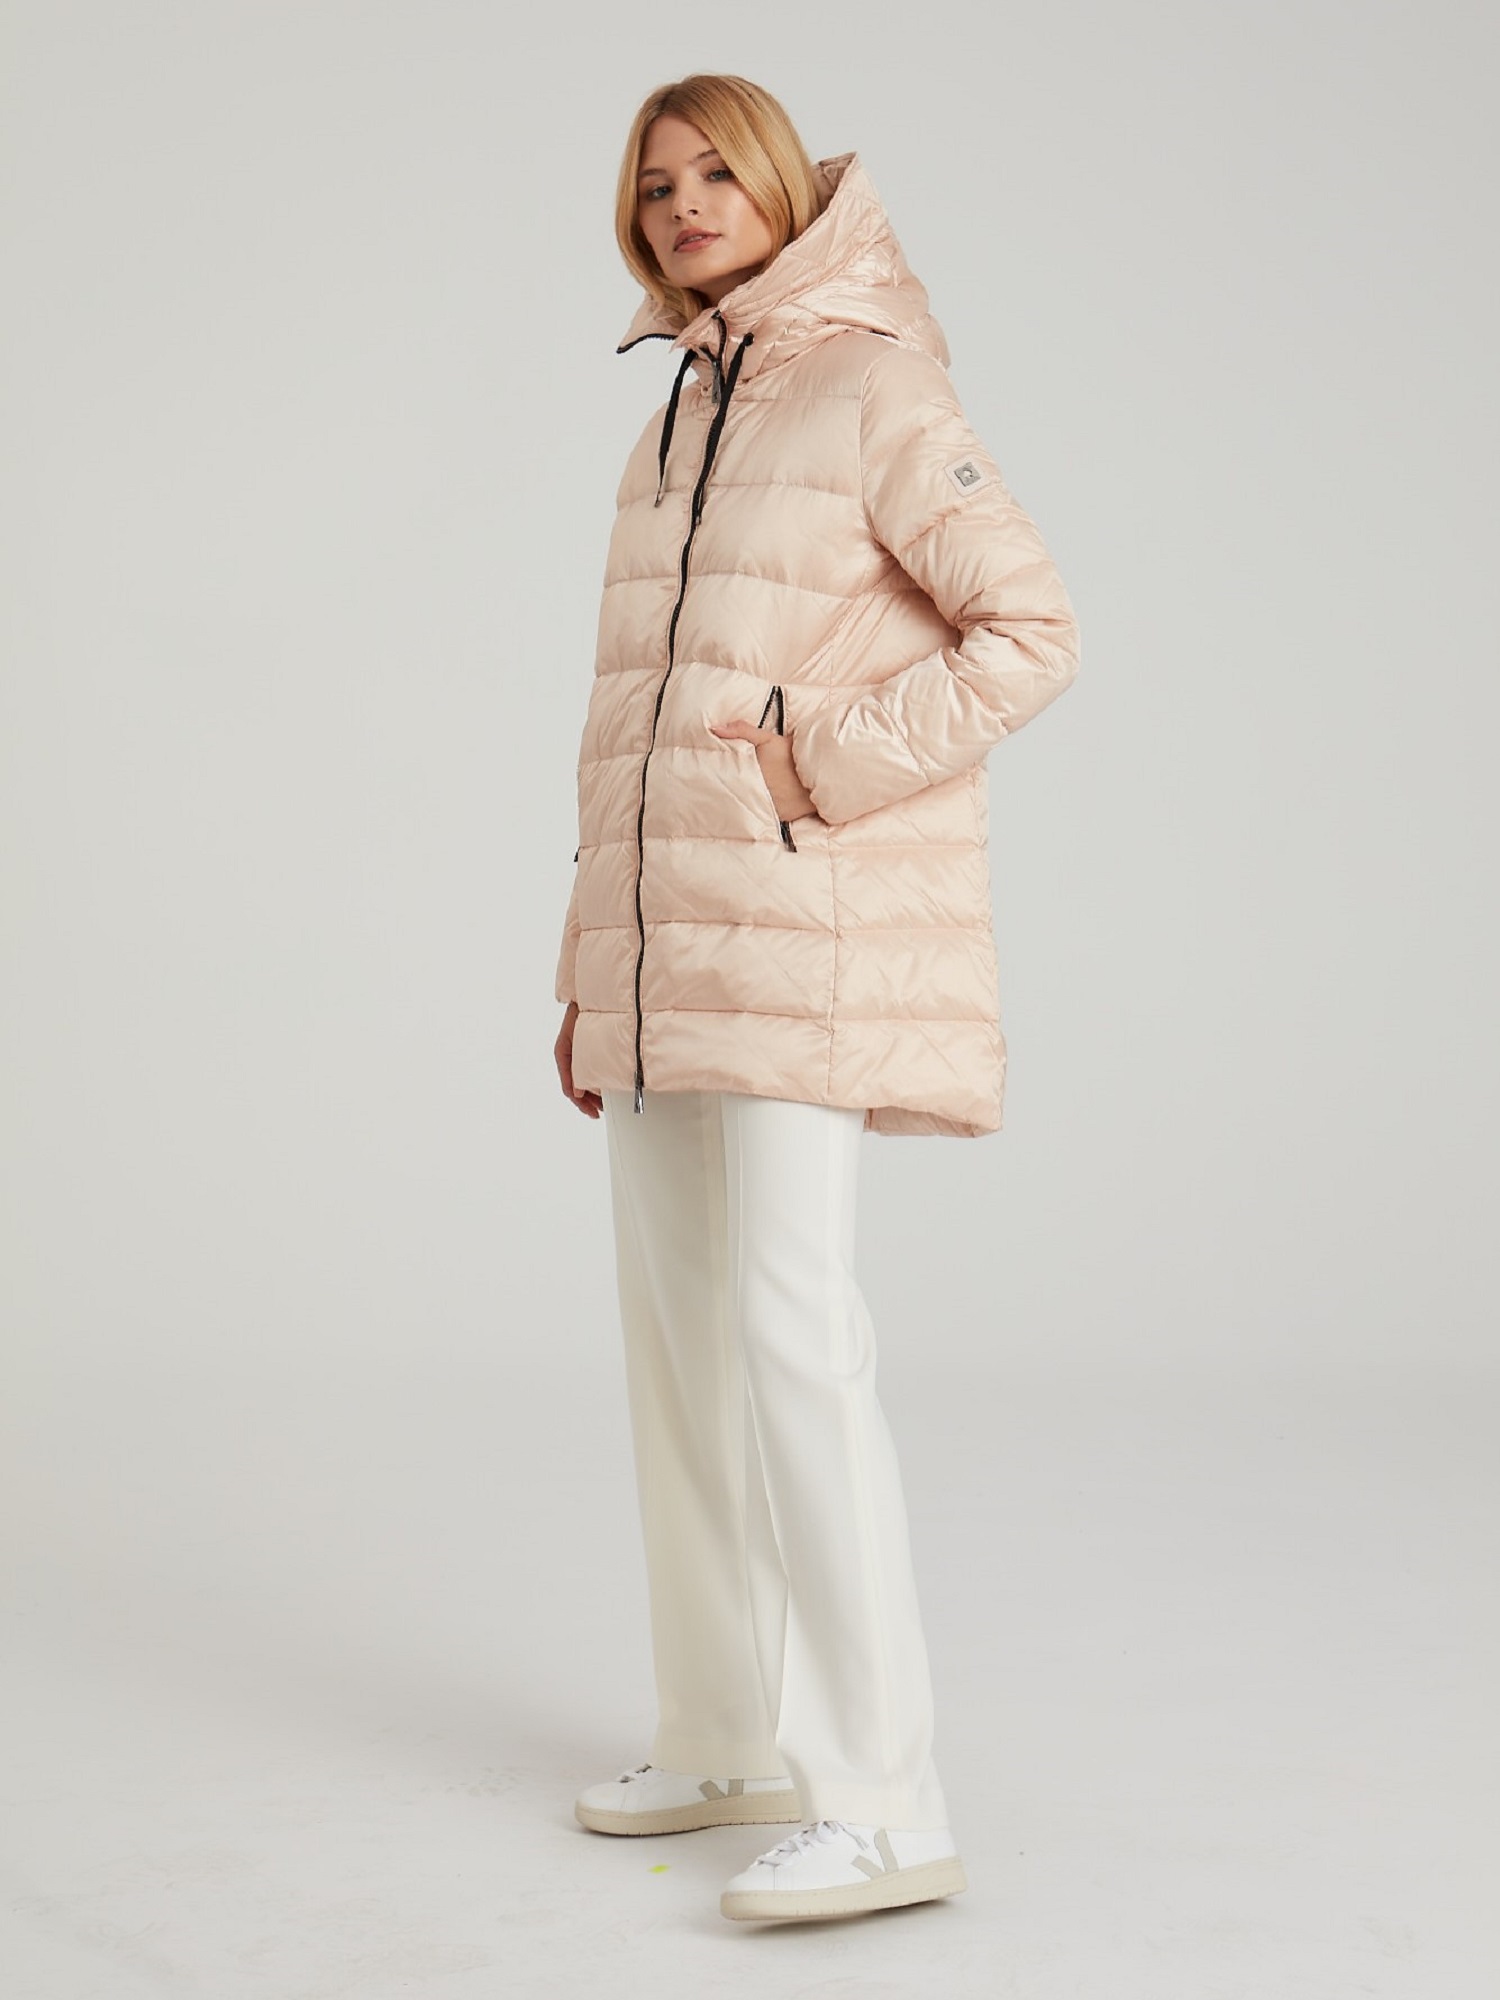 Levně Pearl jacket with contrasting TIFFI zippers